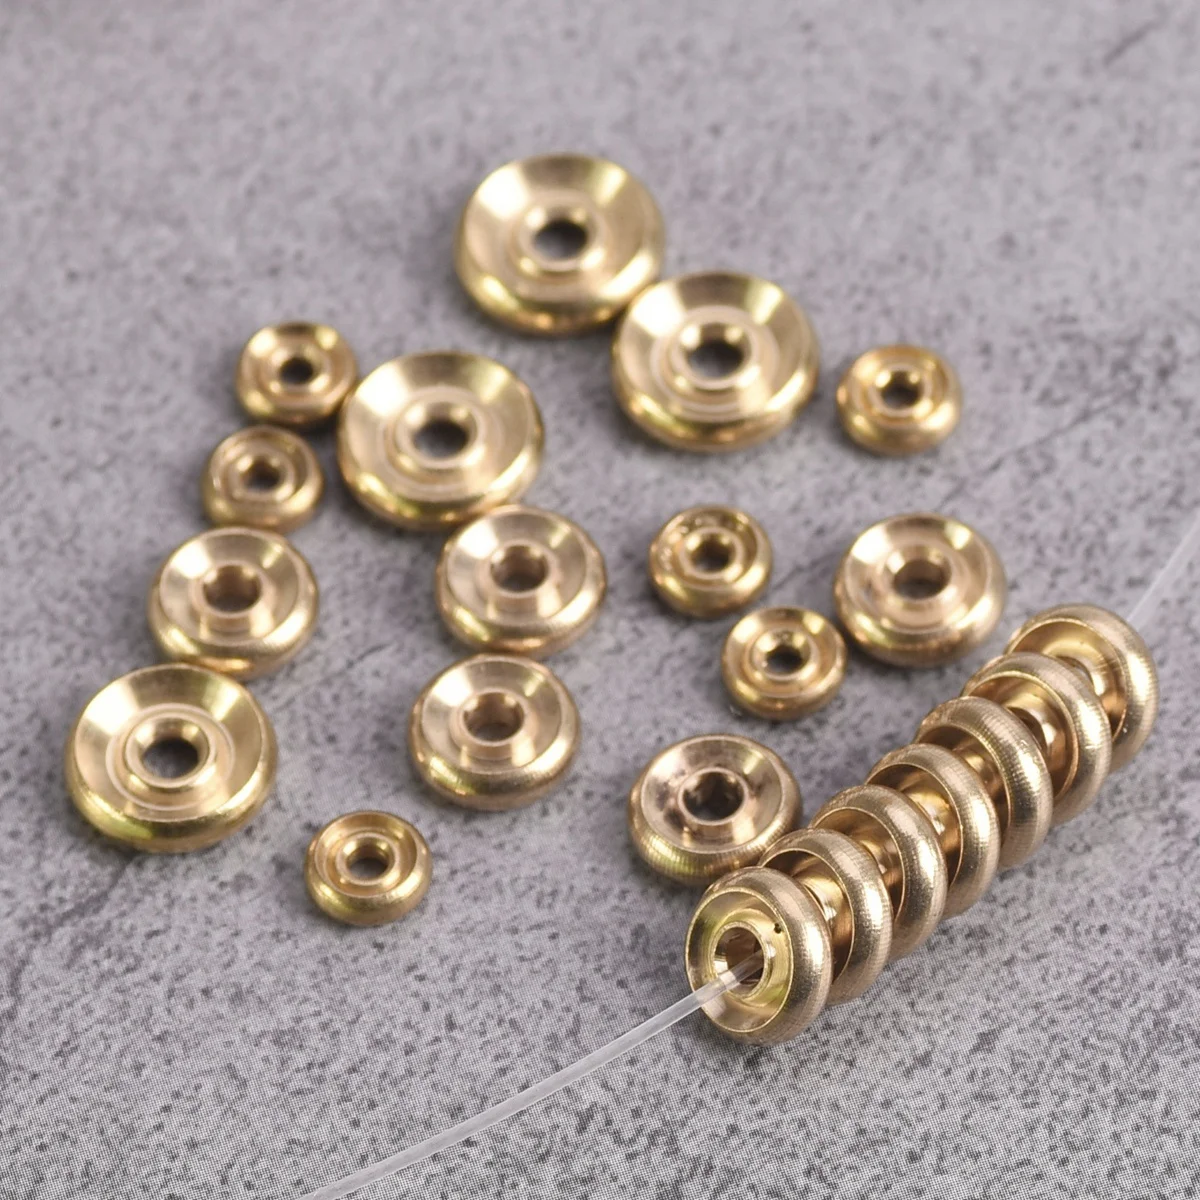 30pcs Flat Round Rondelle 6mm 8mm 10mm Solid Brass Metal Light Gold Color Loose Spacer Beads lot for Jewelry Making Findings ammoon alto trombone brass gold lacquer bb tone b flat wind instrument